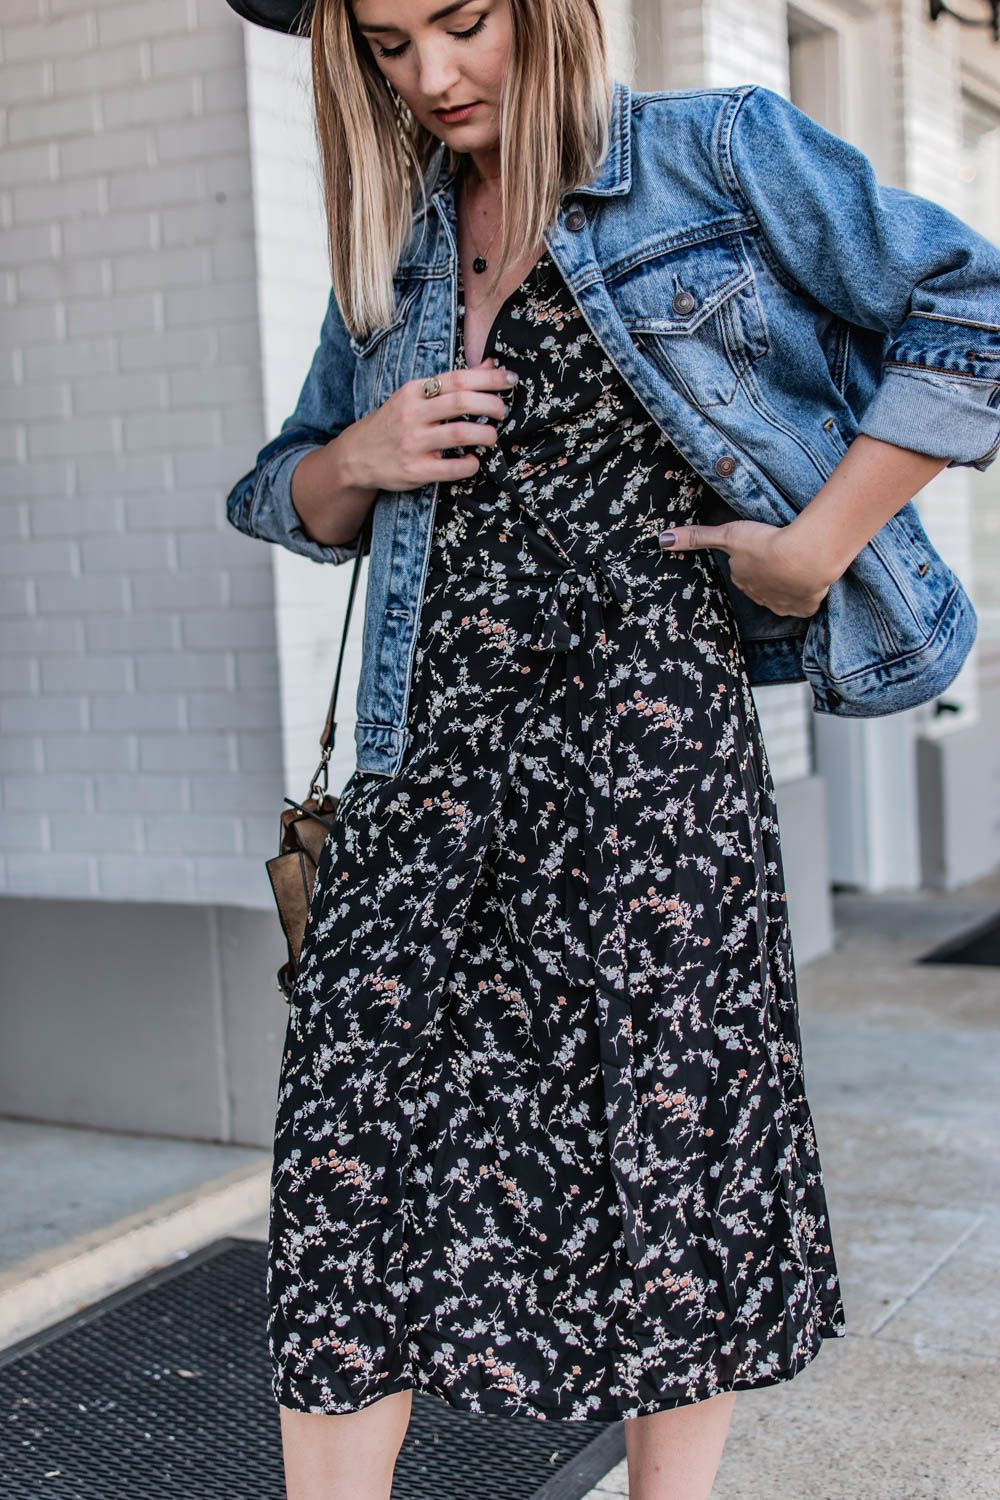 denim jacket and floral dress outfit